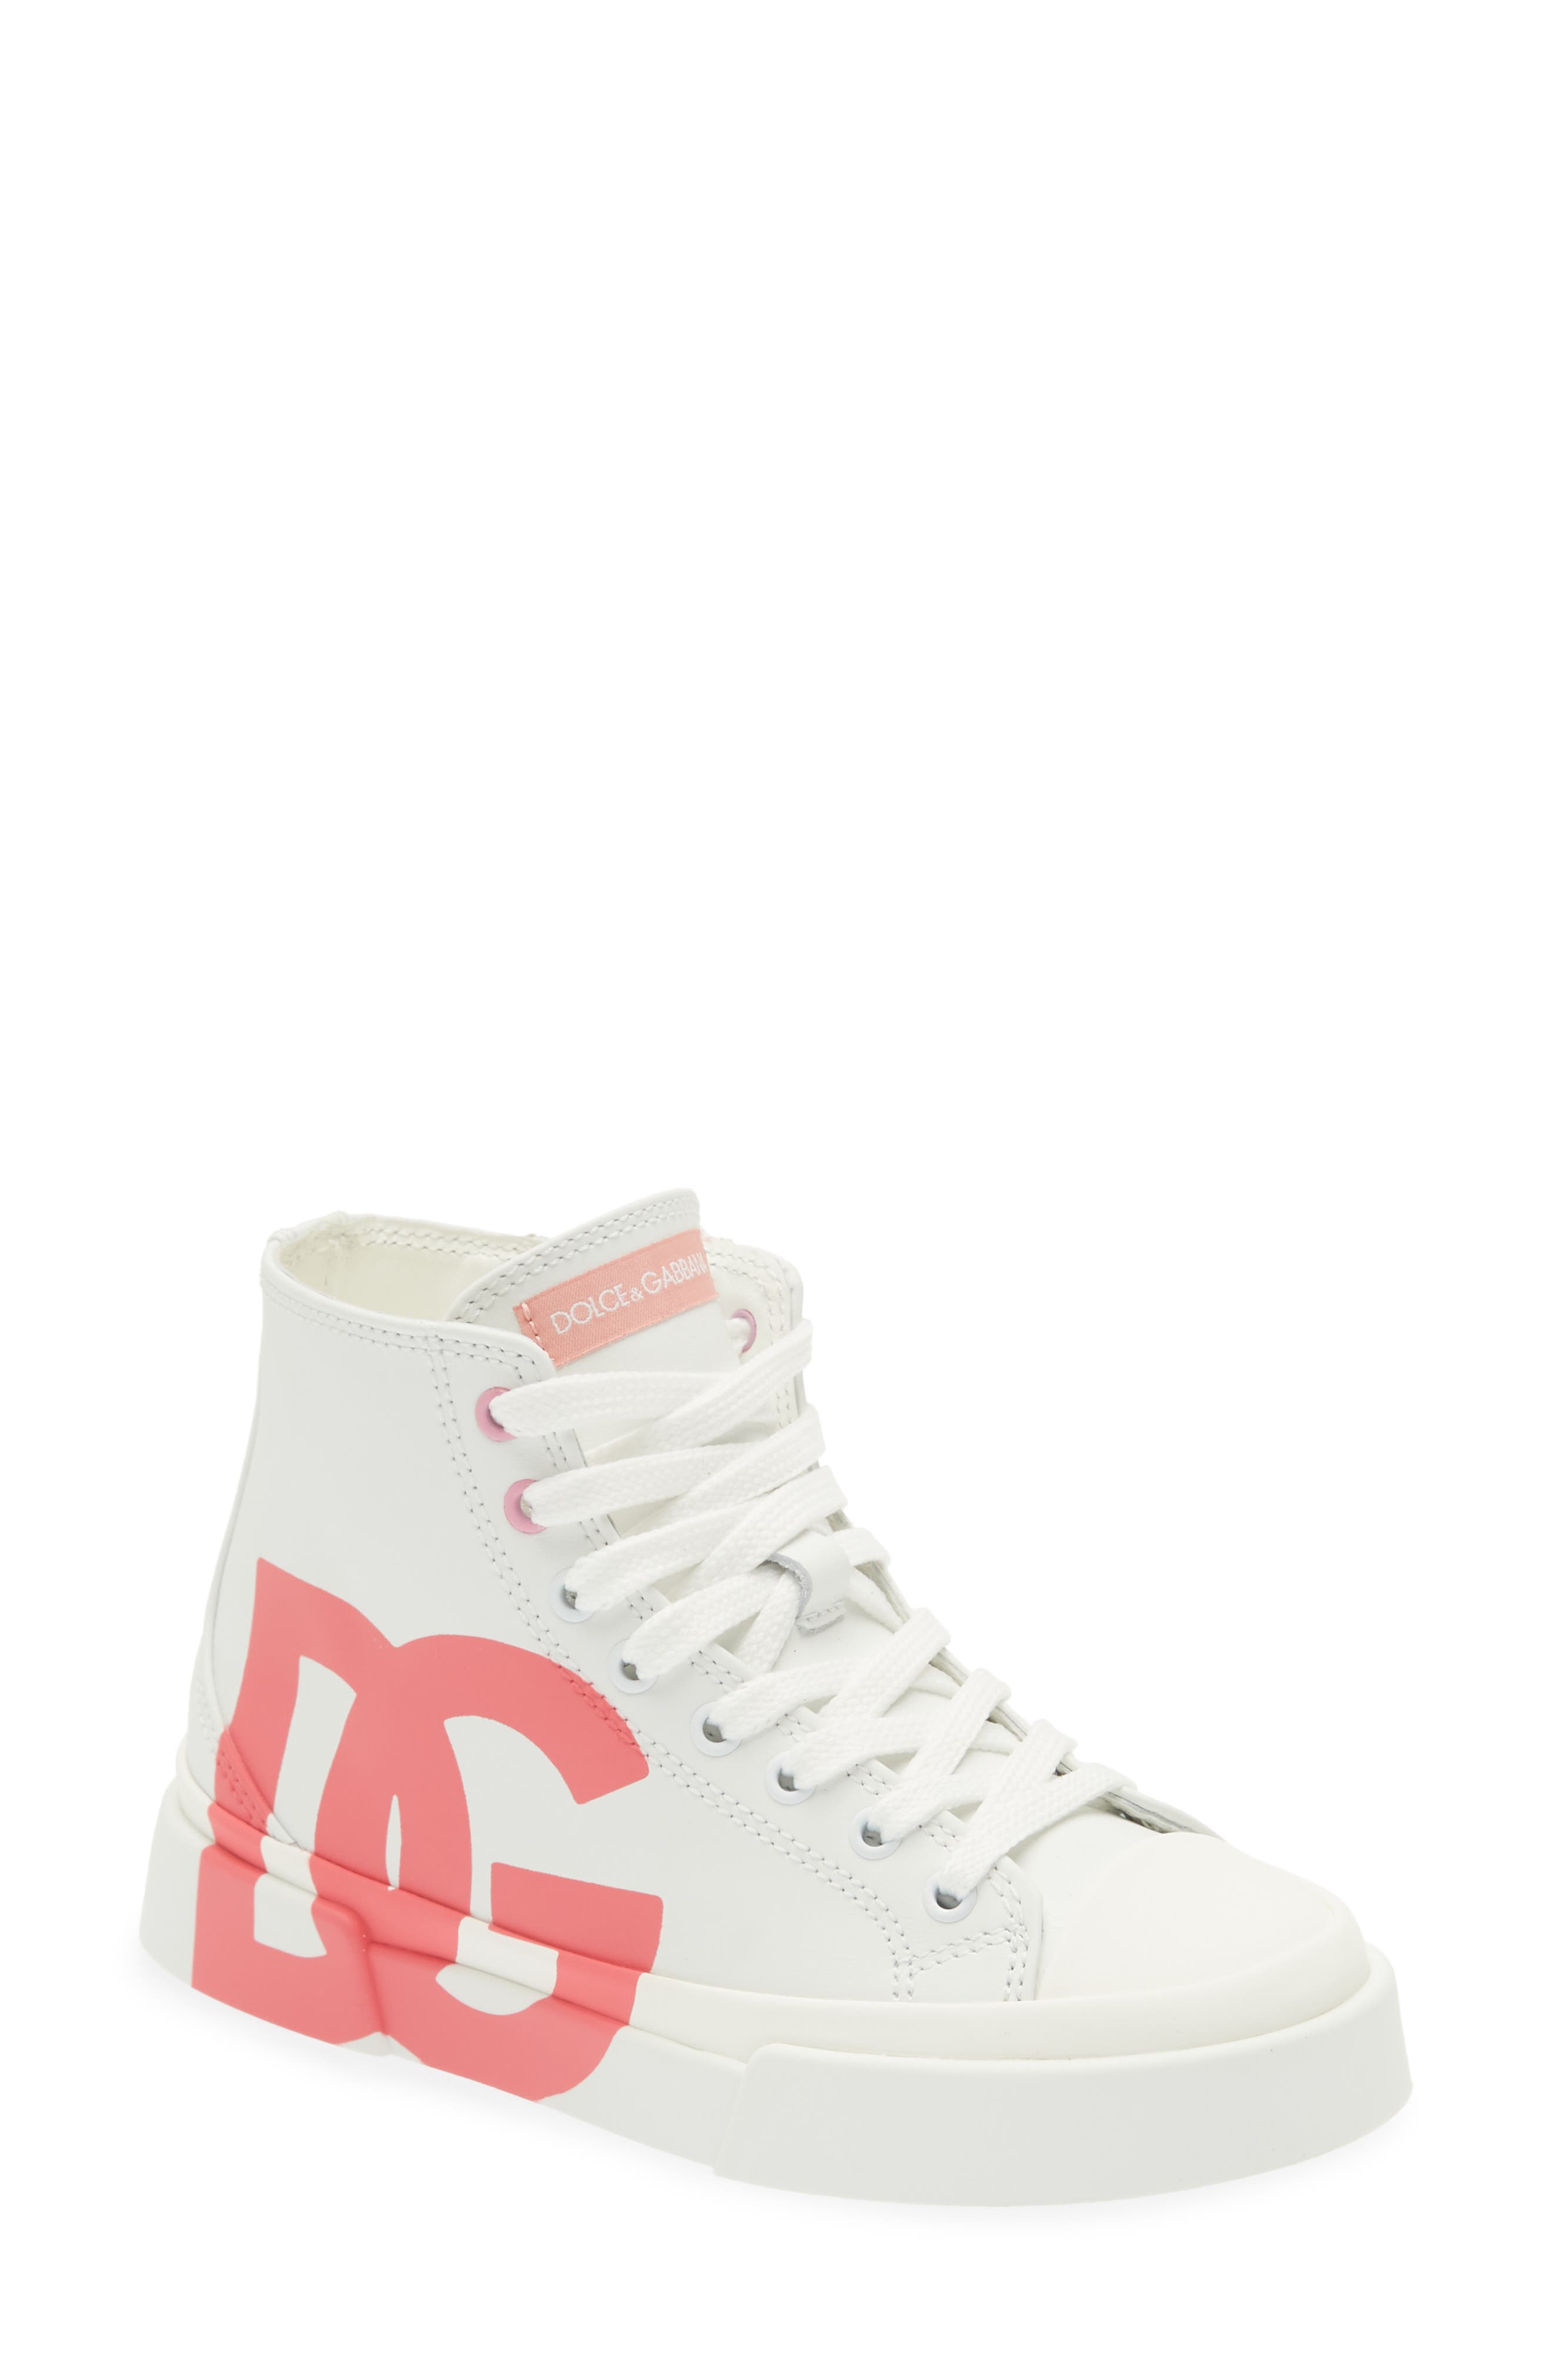 Dolce & Gabbana DG Logo High Top Sneaker in White/Pink at Nordstrom, Size 10Us